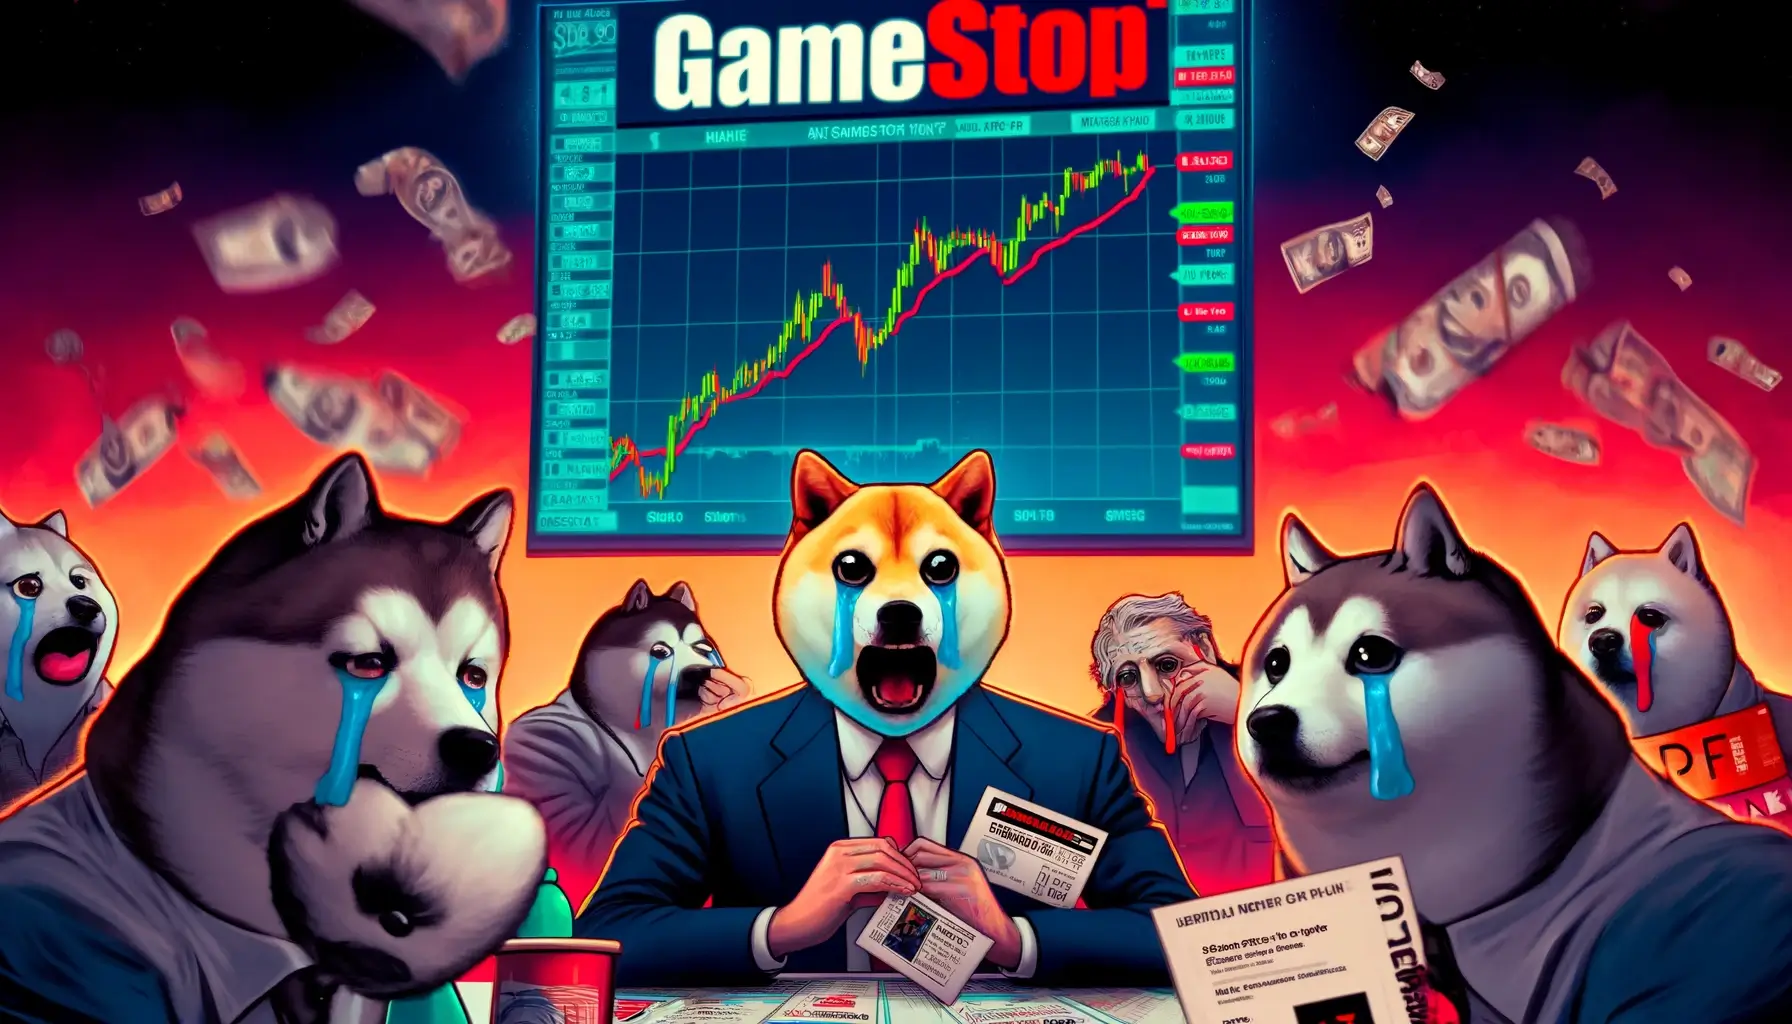 Meme Sector Experiencing Sharp Sell-off as GameStop Losses Continue